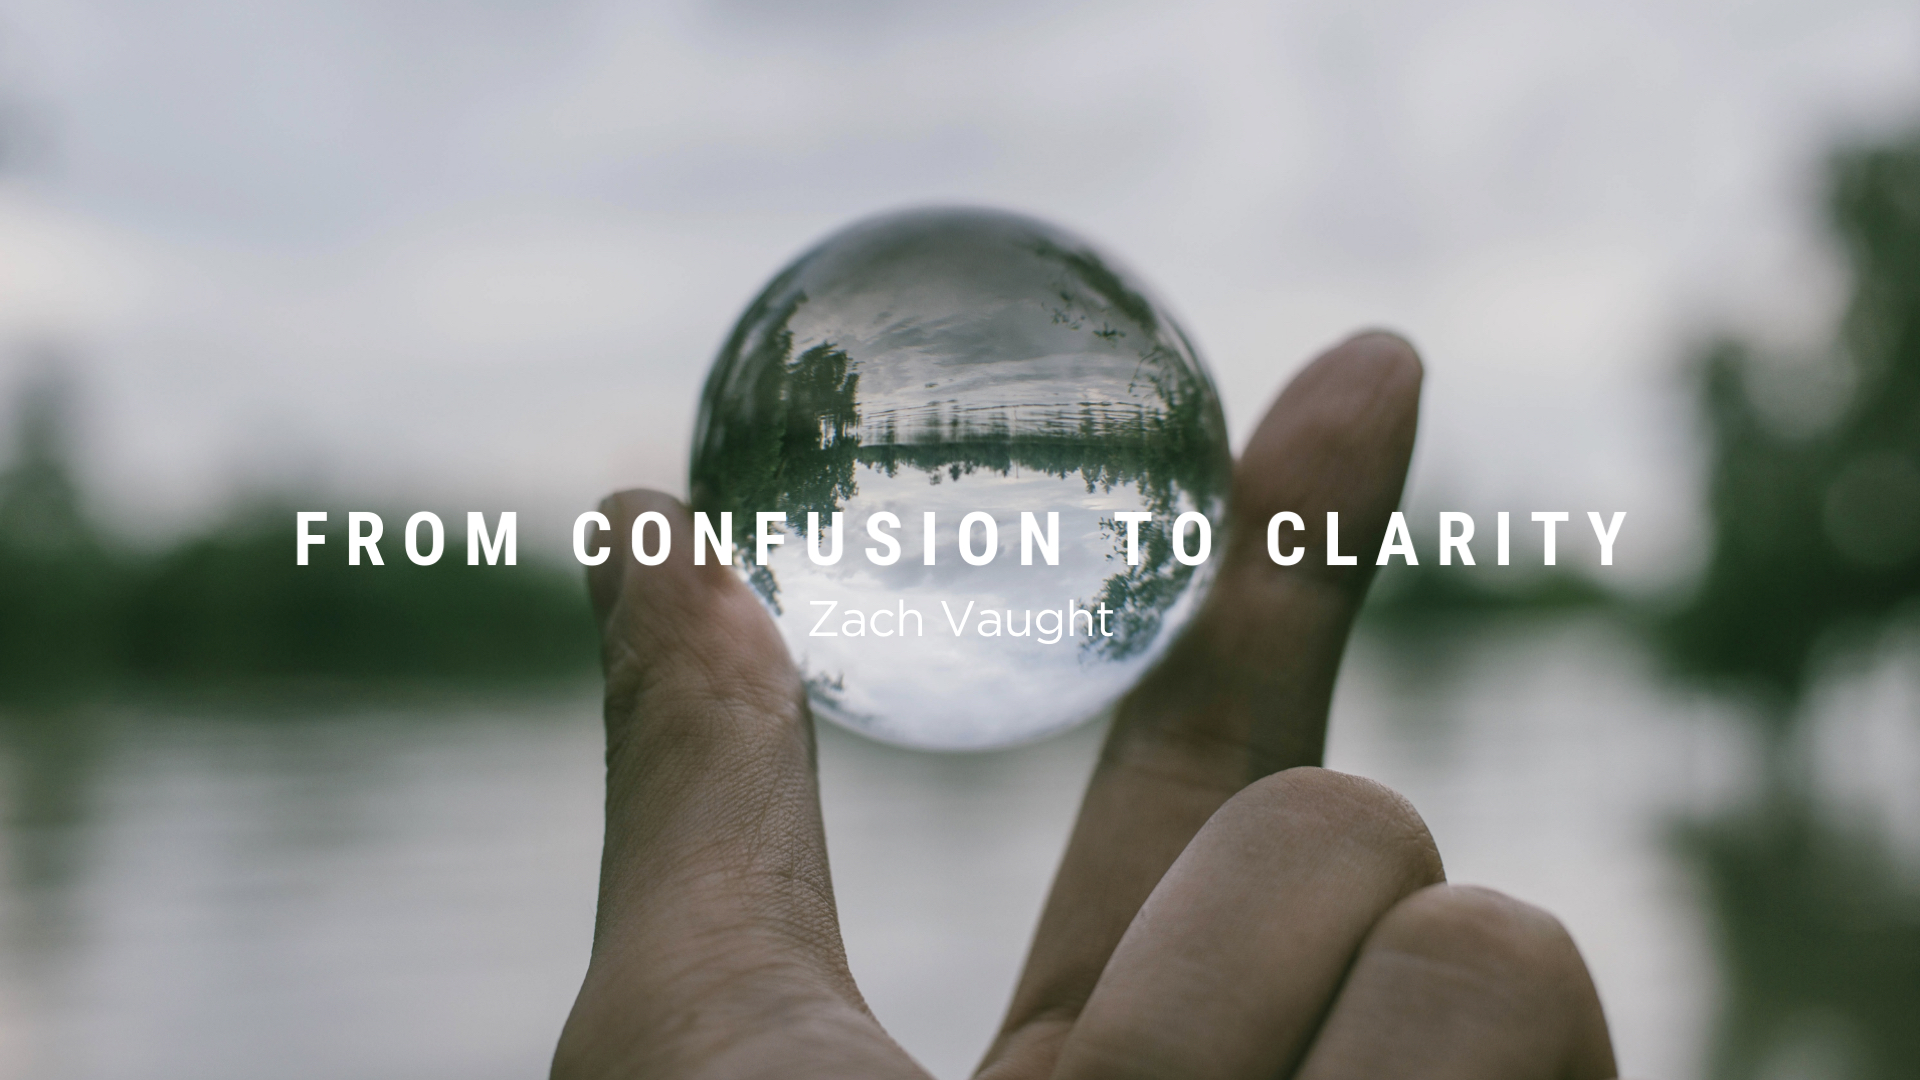 From Confusion to Clarity